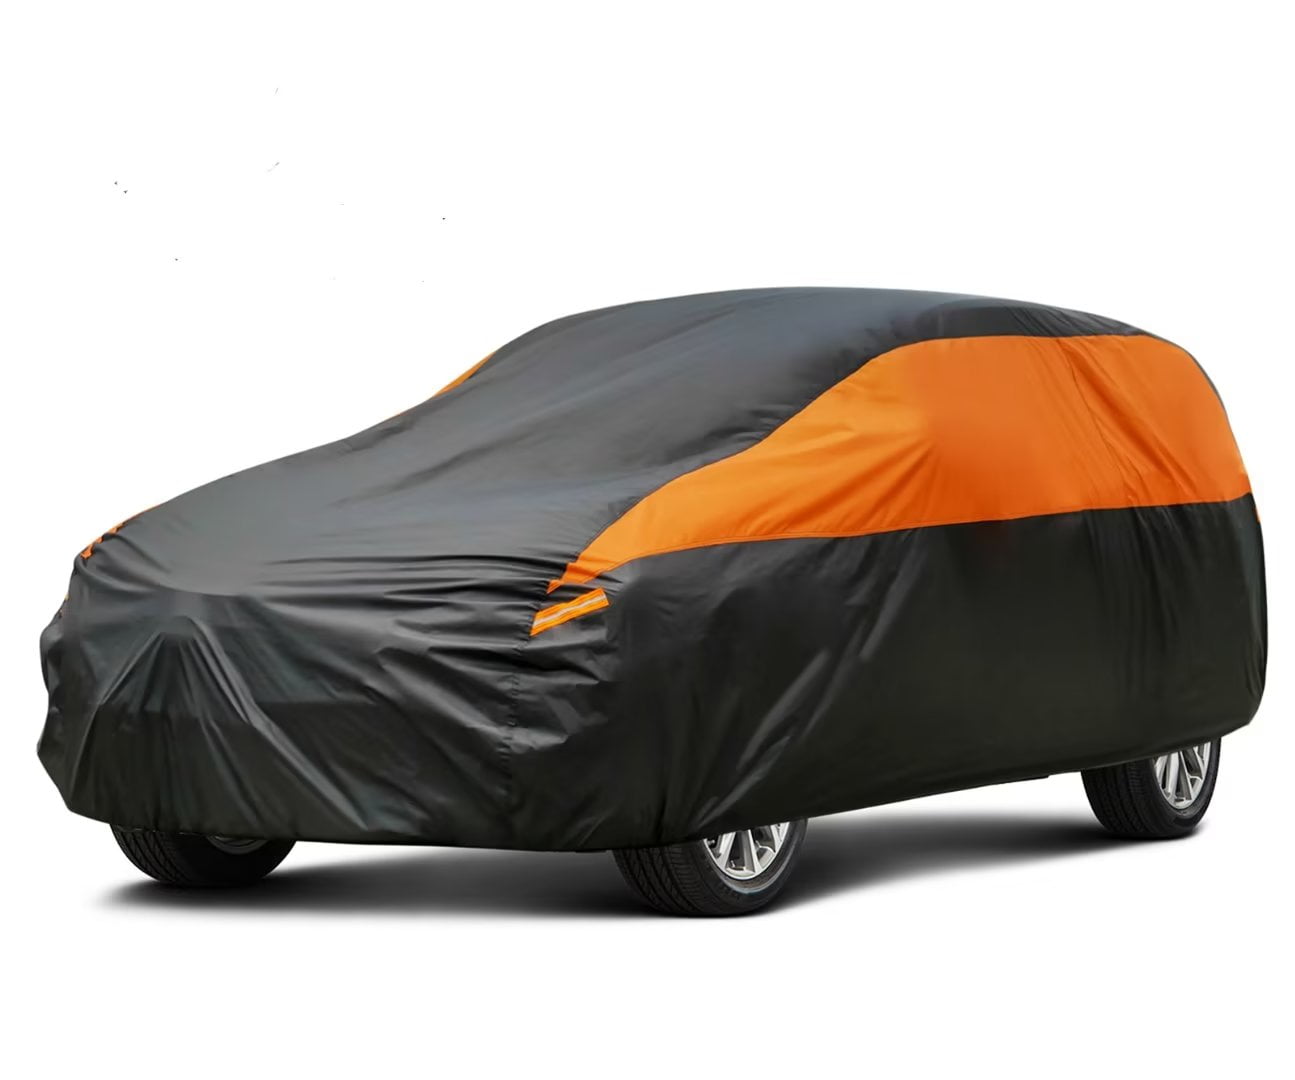 Car Cover Waterproof All Weather for Sedan Coupe Sport Car, Size A2 Length 164 to 174 inch,Black, Size: A2-Fit Sport Car/Coupe-Length (164 to 174 inch